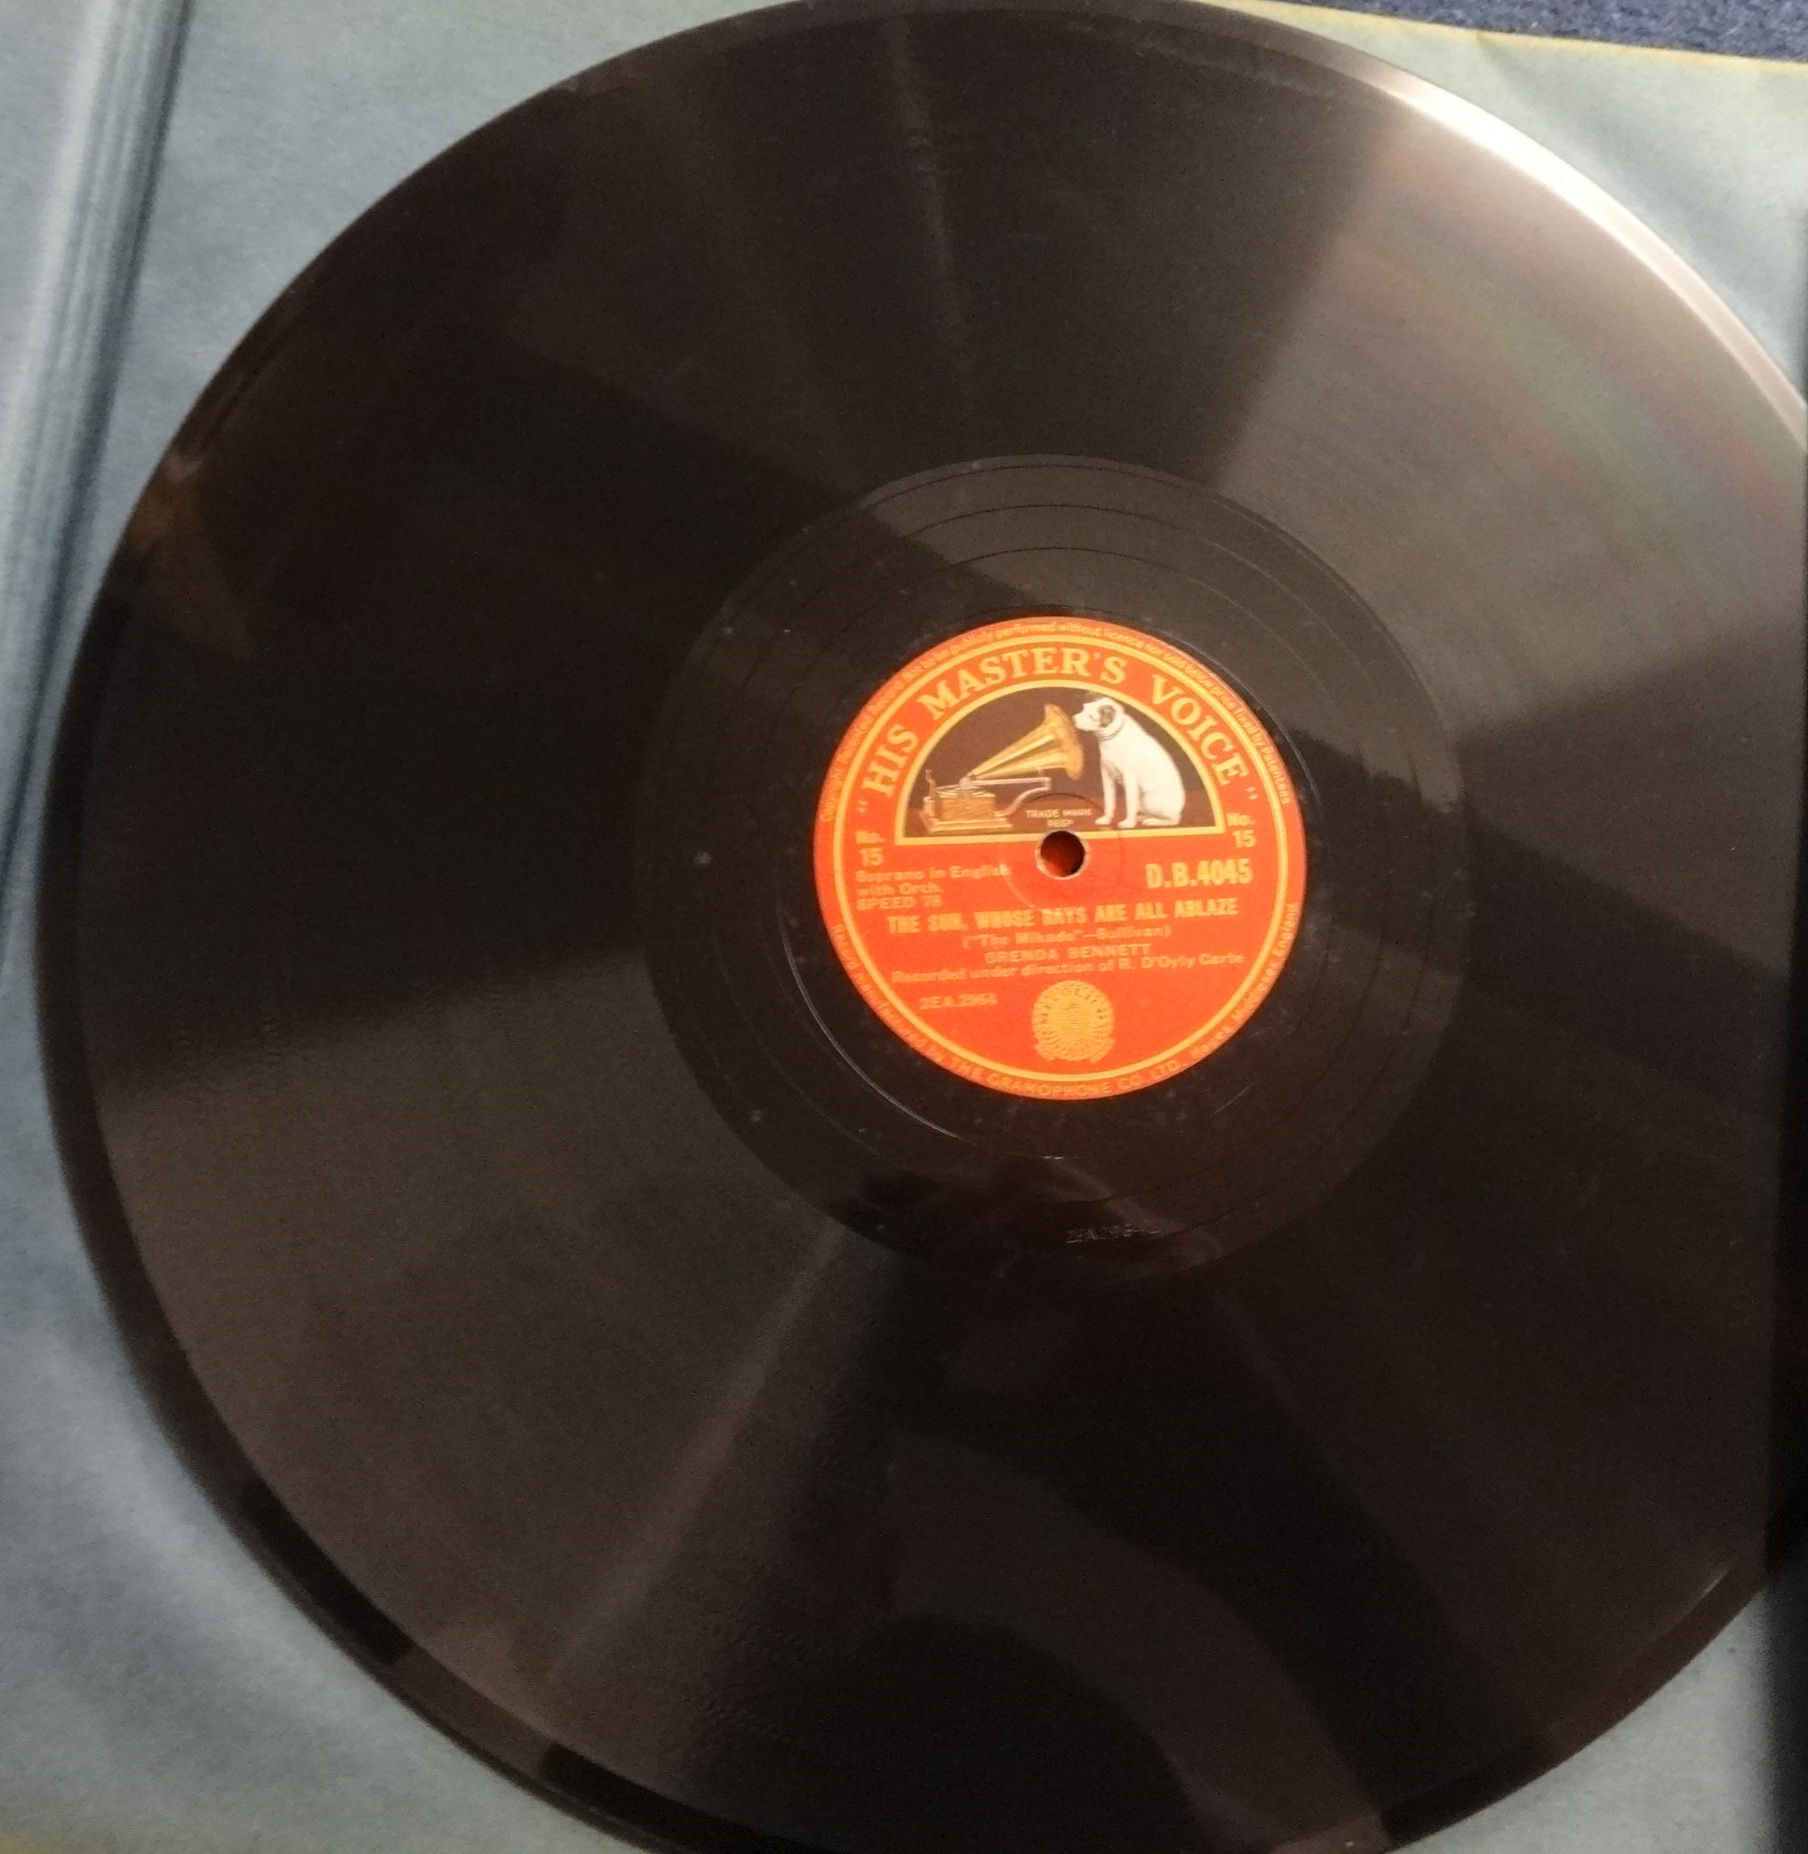 Gilbert and Sullivan, The Mikado 78 RPM record collection by HMV. - Image 4 of 4